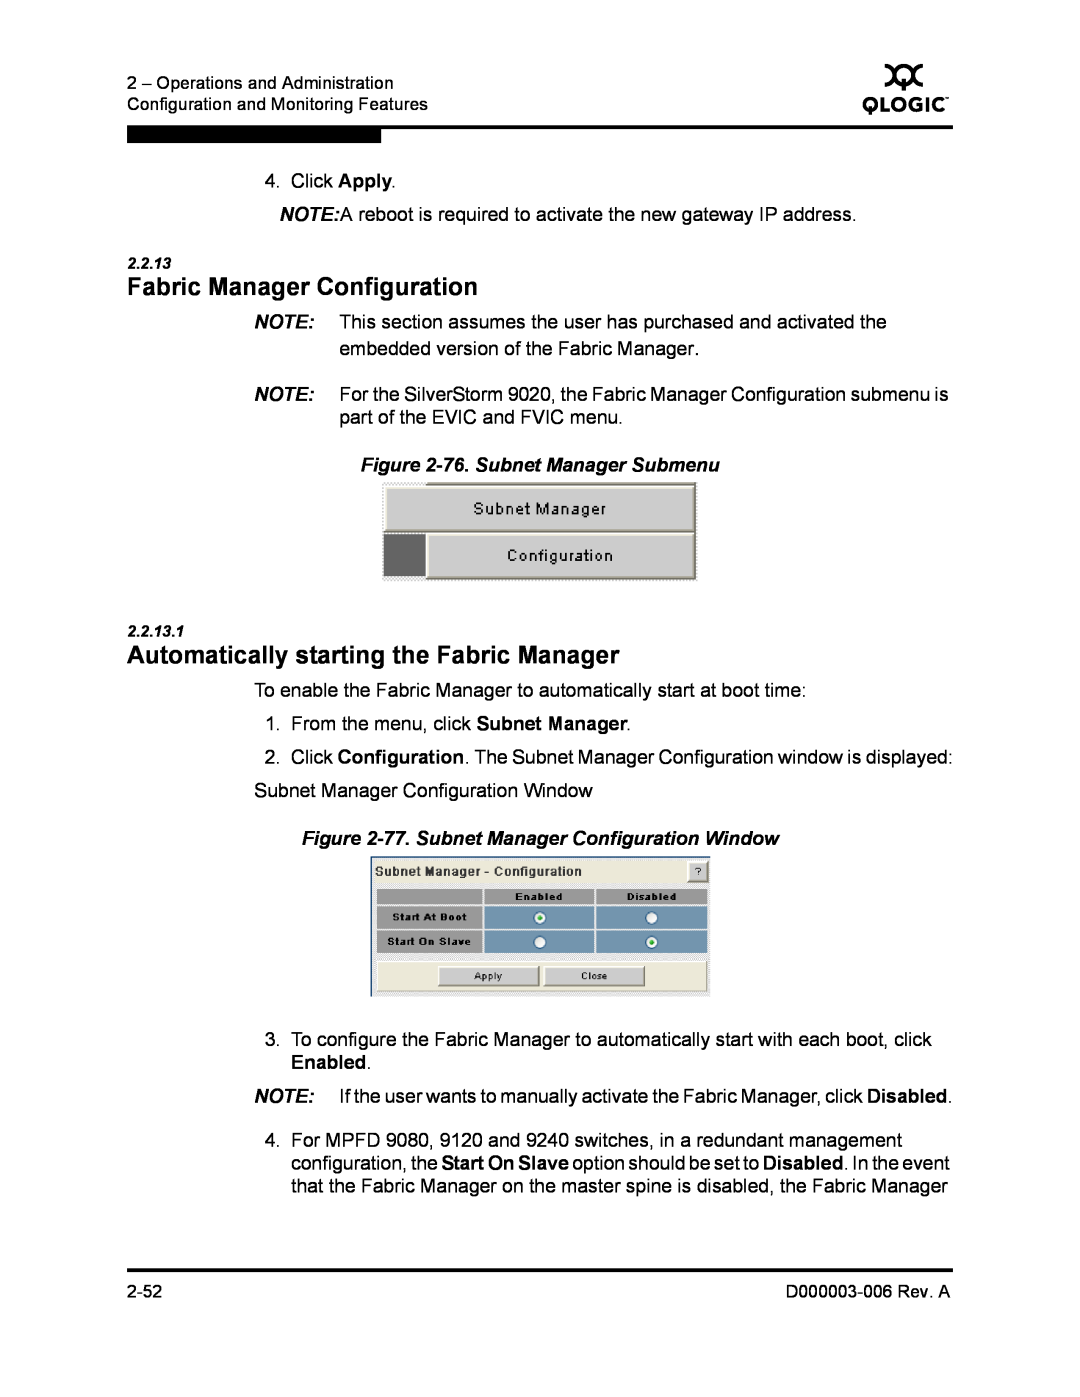 Q-Logic 9000 manual Fabric Manager Configuration, Automatically starting the Fabric Manager, 76. Subnet Manager Submenu 